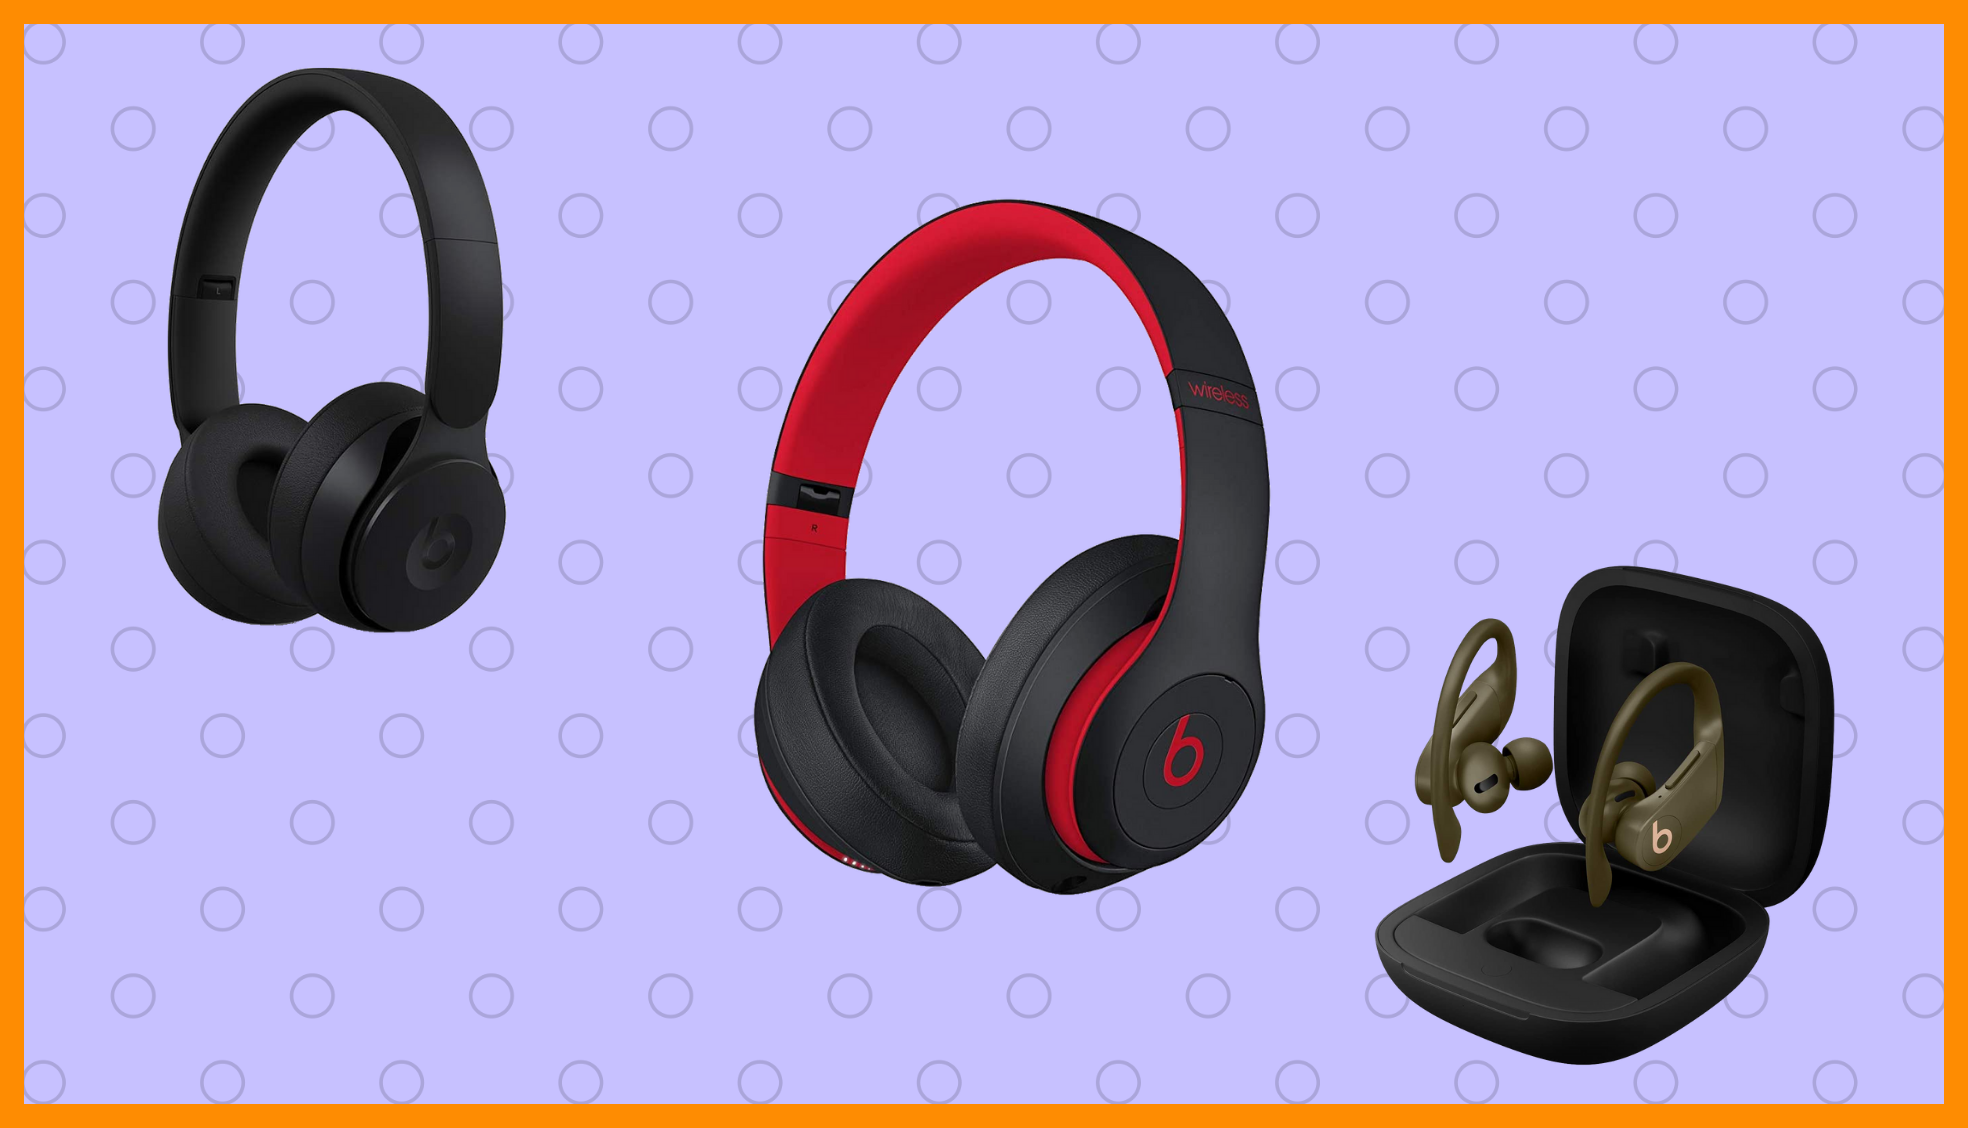 Beats headphones and earbuds are on sale at Amazon